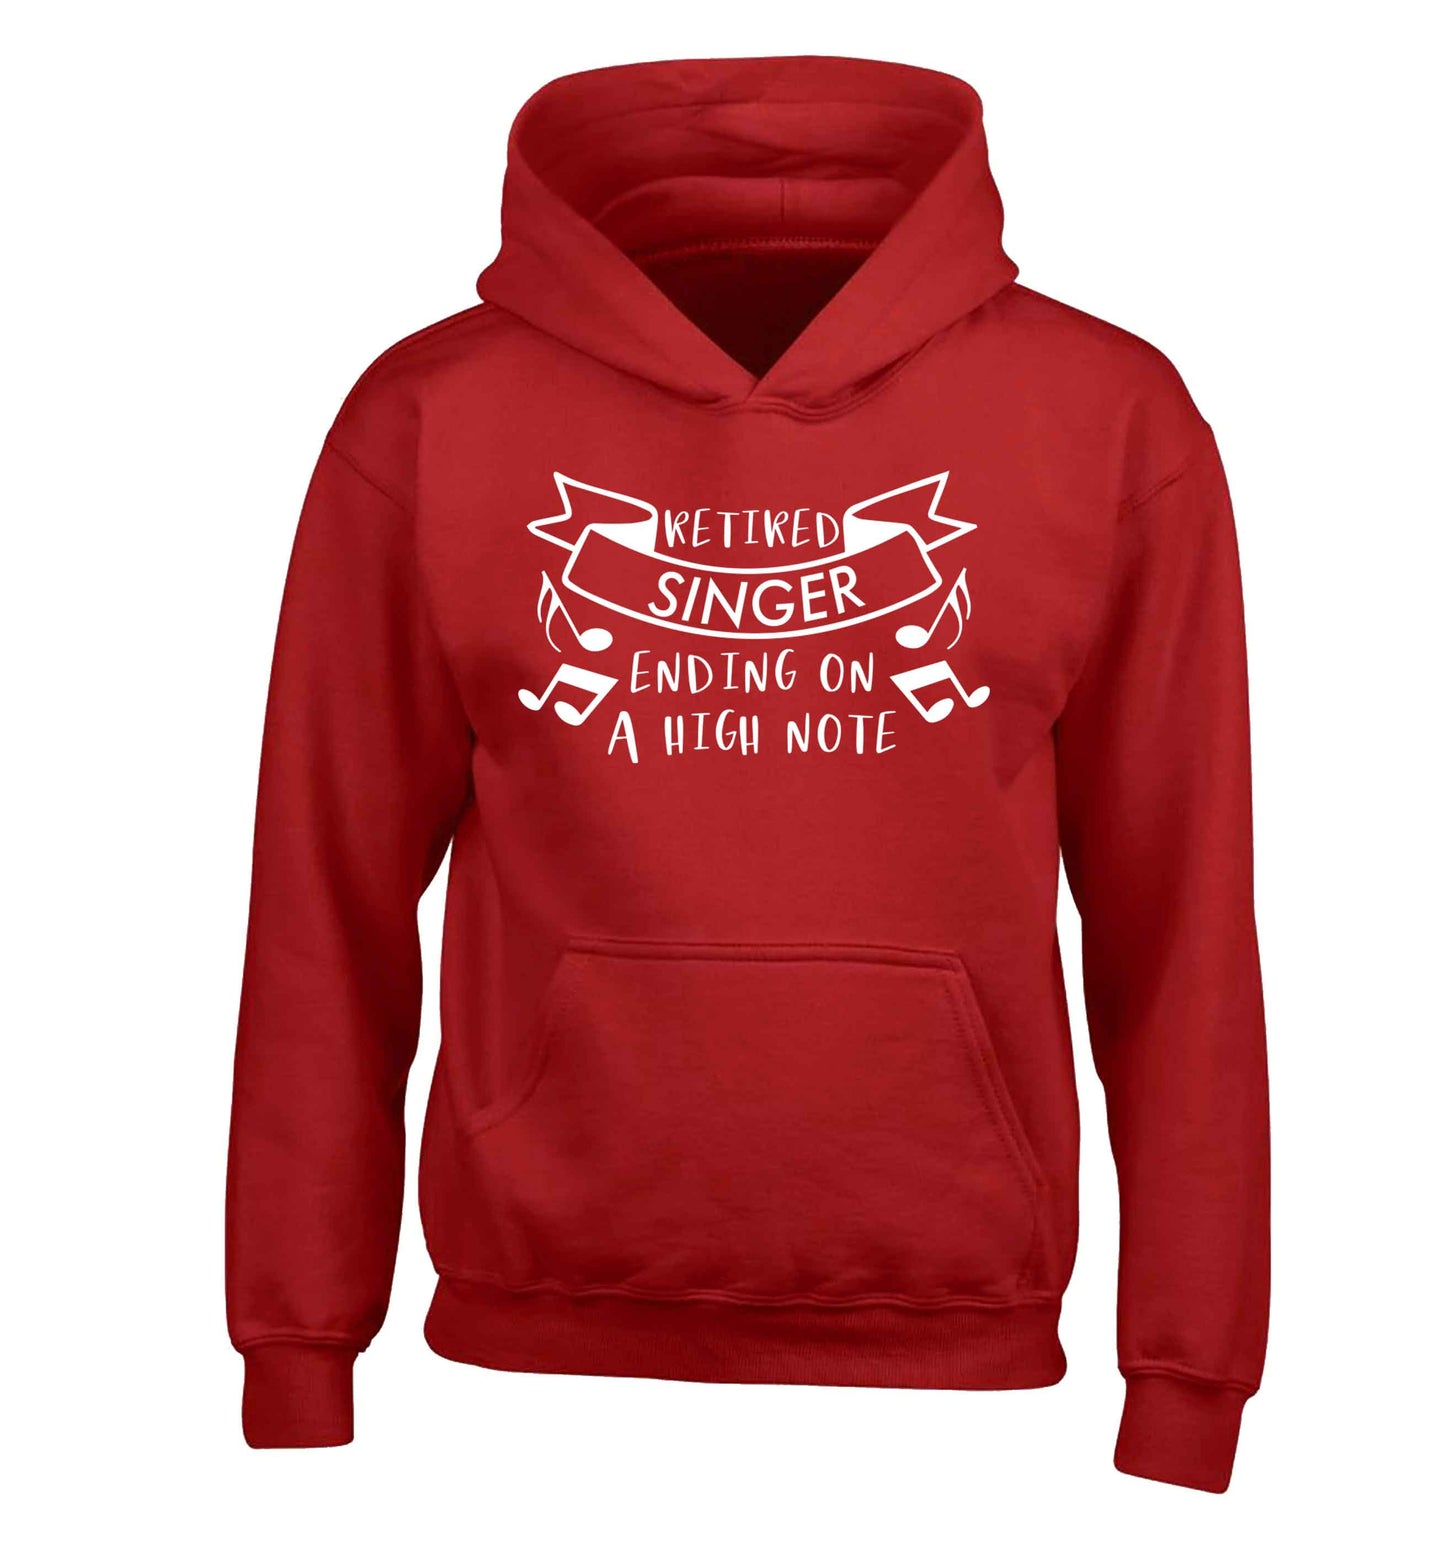 Retired singer ending on a high note children's red hoodie 12-13 Years